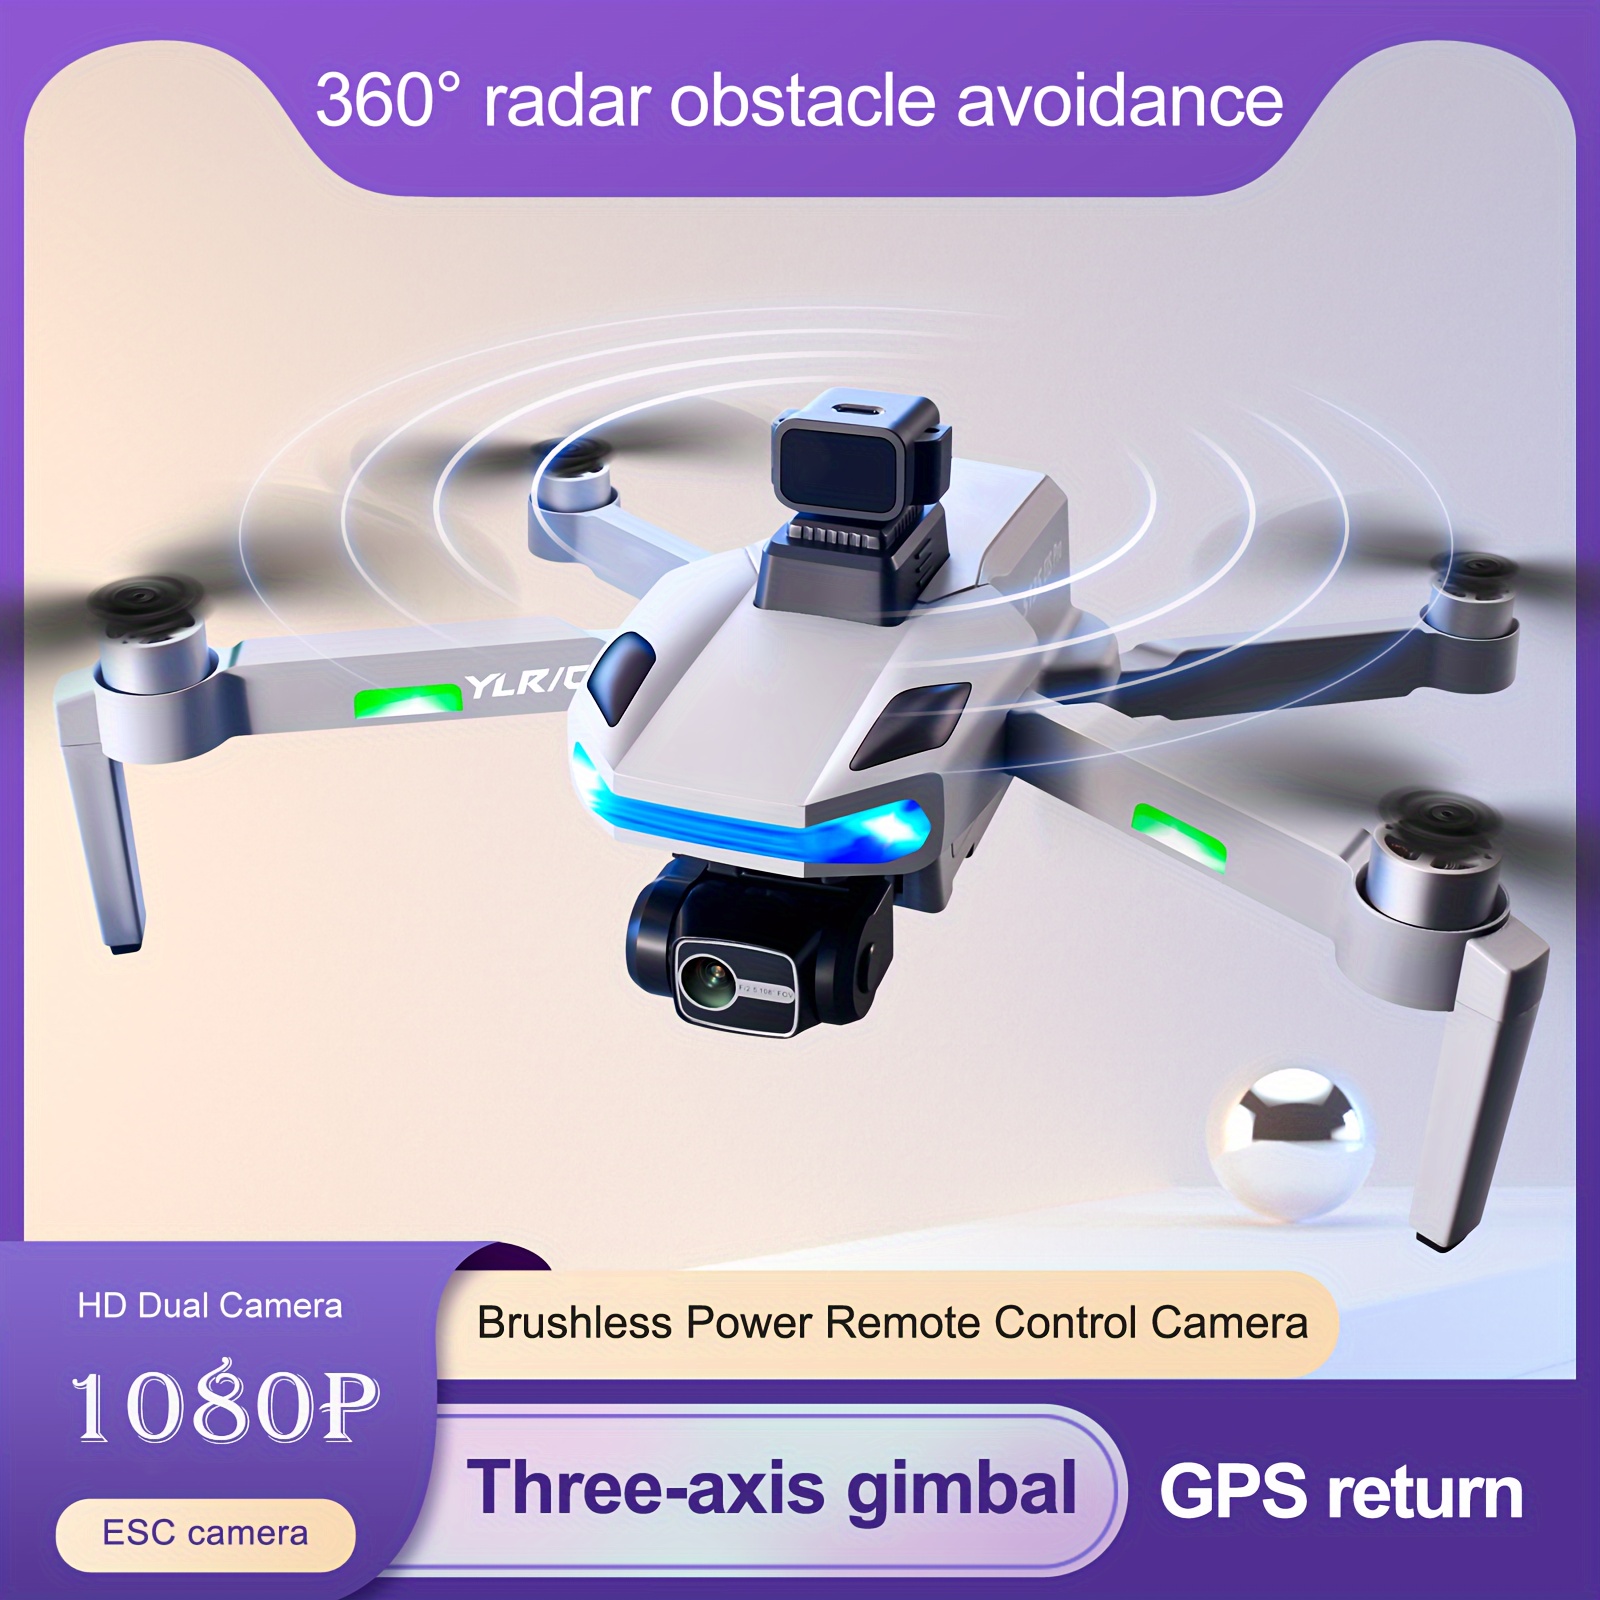  Drone with Camera HD 2 Cameras Mini Drones for Adults 135°  Electrically Adjustable RC FPV WIFI Foldable Quadcopter Toy Aircraft Gifts  360° Flips Gravity Control Altitude Hold for Beginners 2 Batteries 